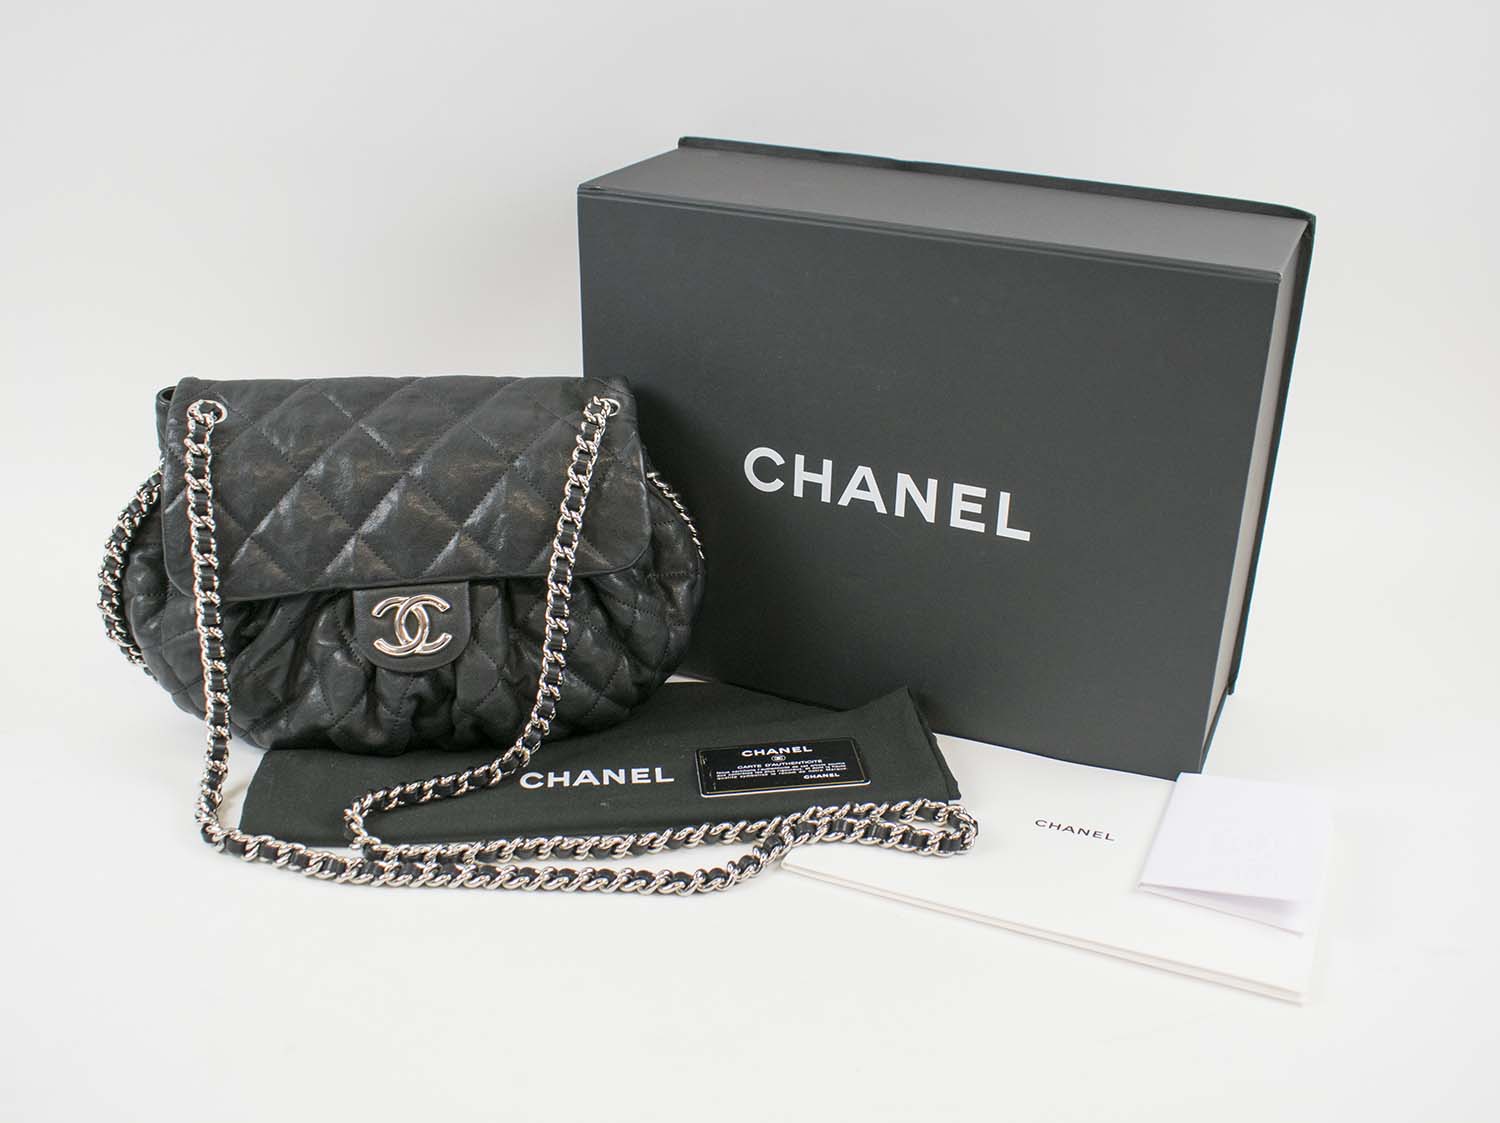 CHANEL CHAIN AROUND MESSENGER BAG, black quilted leather with silver tone  hardware, chain and leather strap and around the edges of the bag, cream  fabric lining, authenticity card, original box, 30cm x